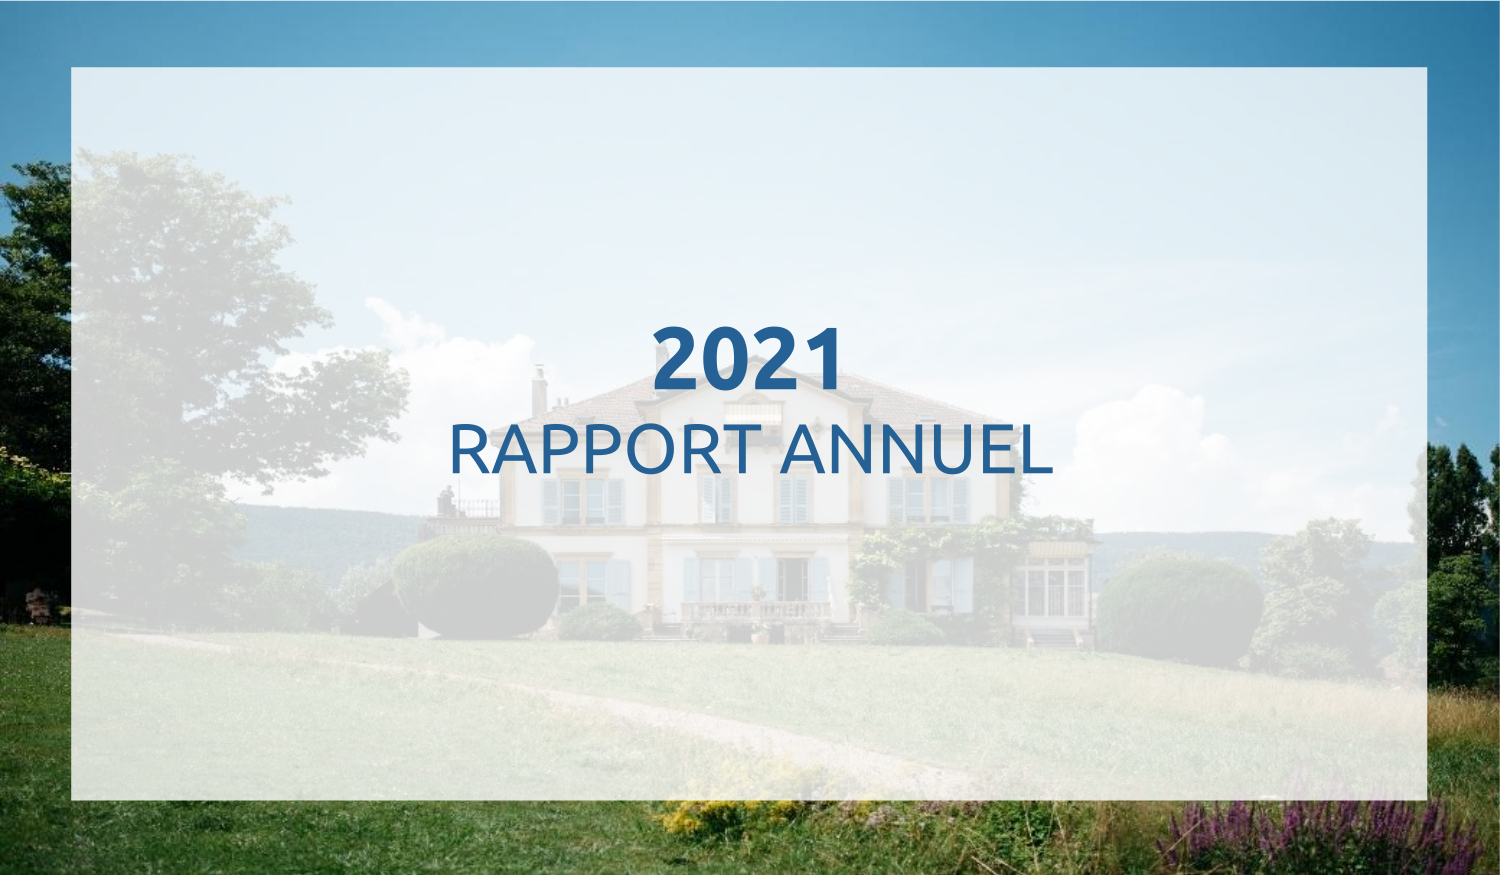 Rapport annuel 2021_PerspectivePlus 8